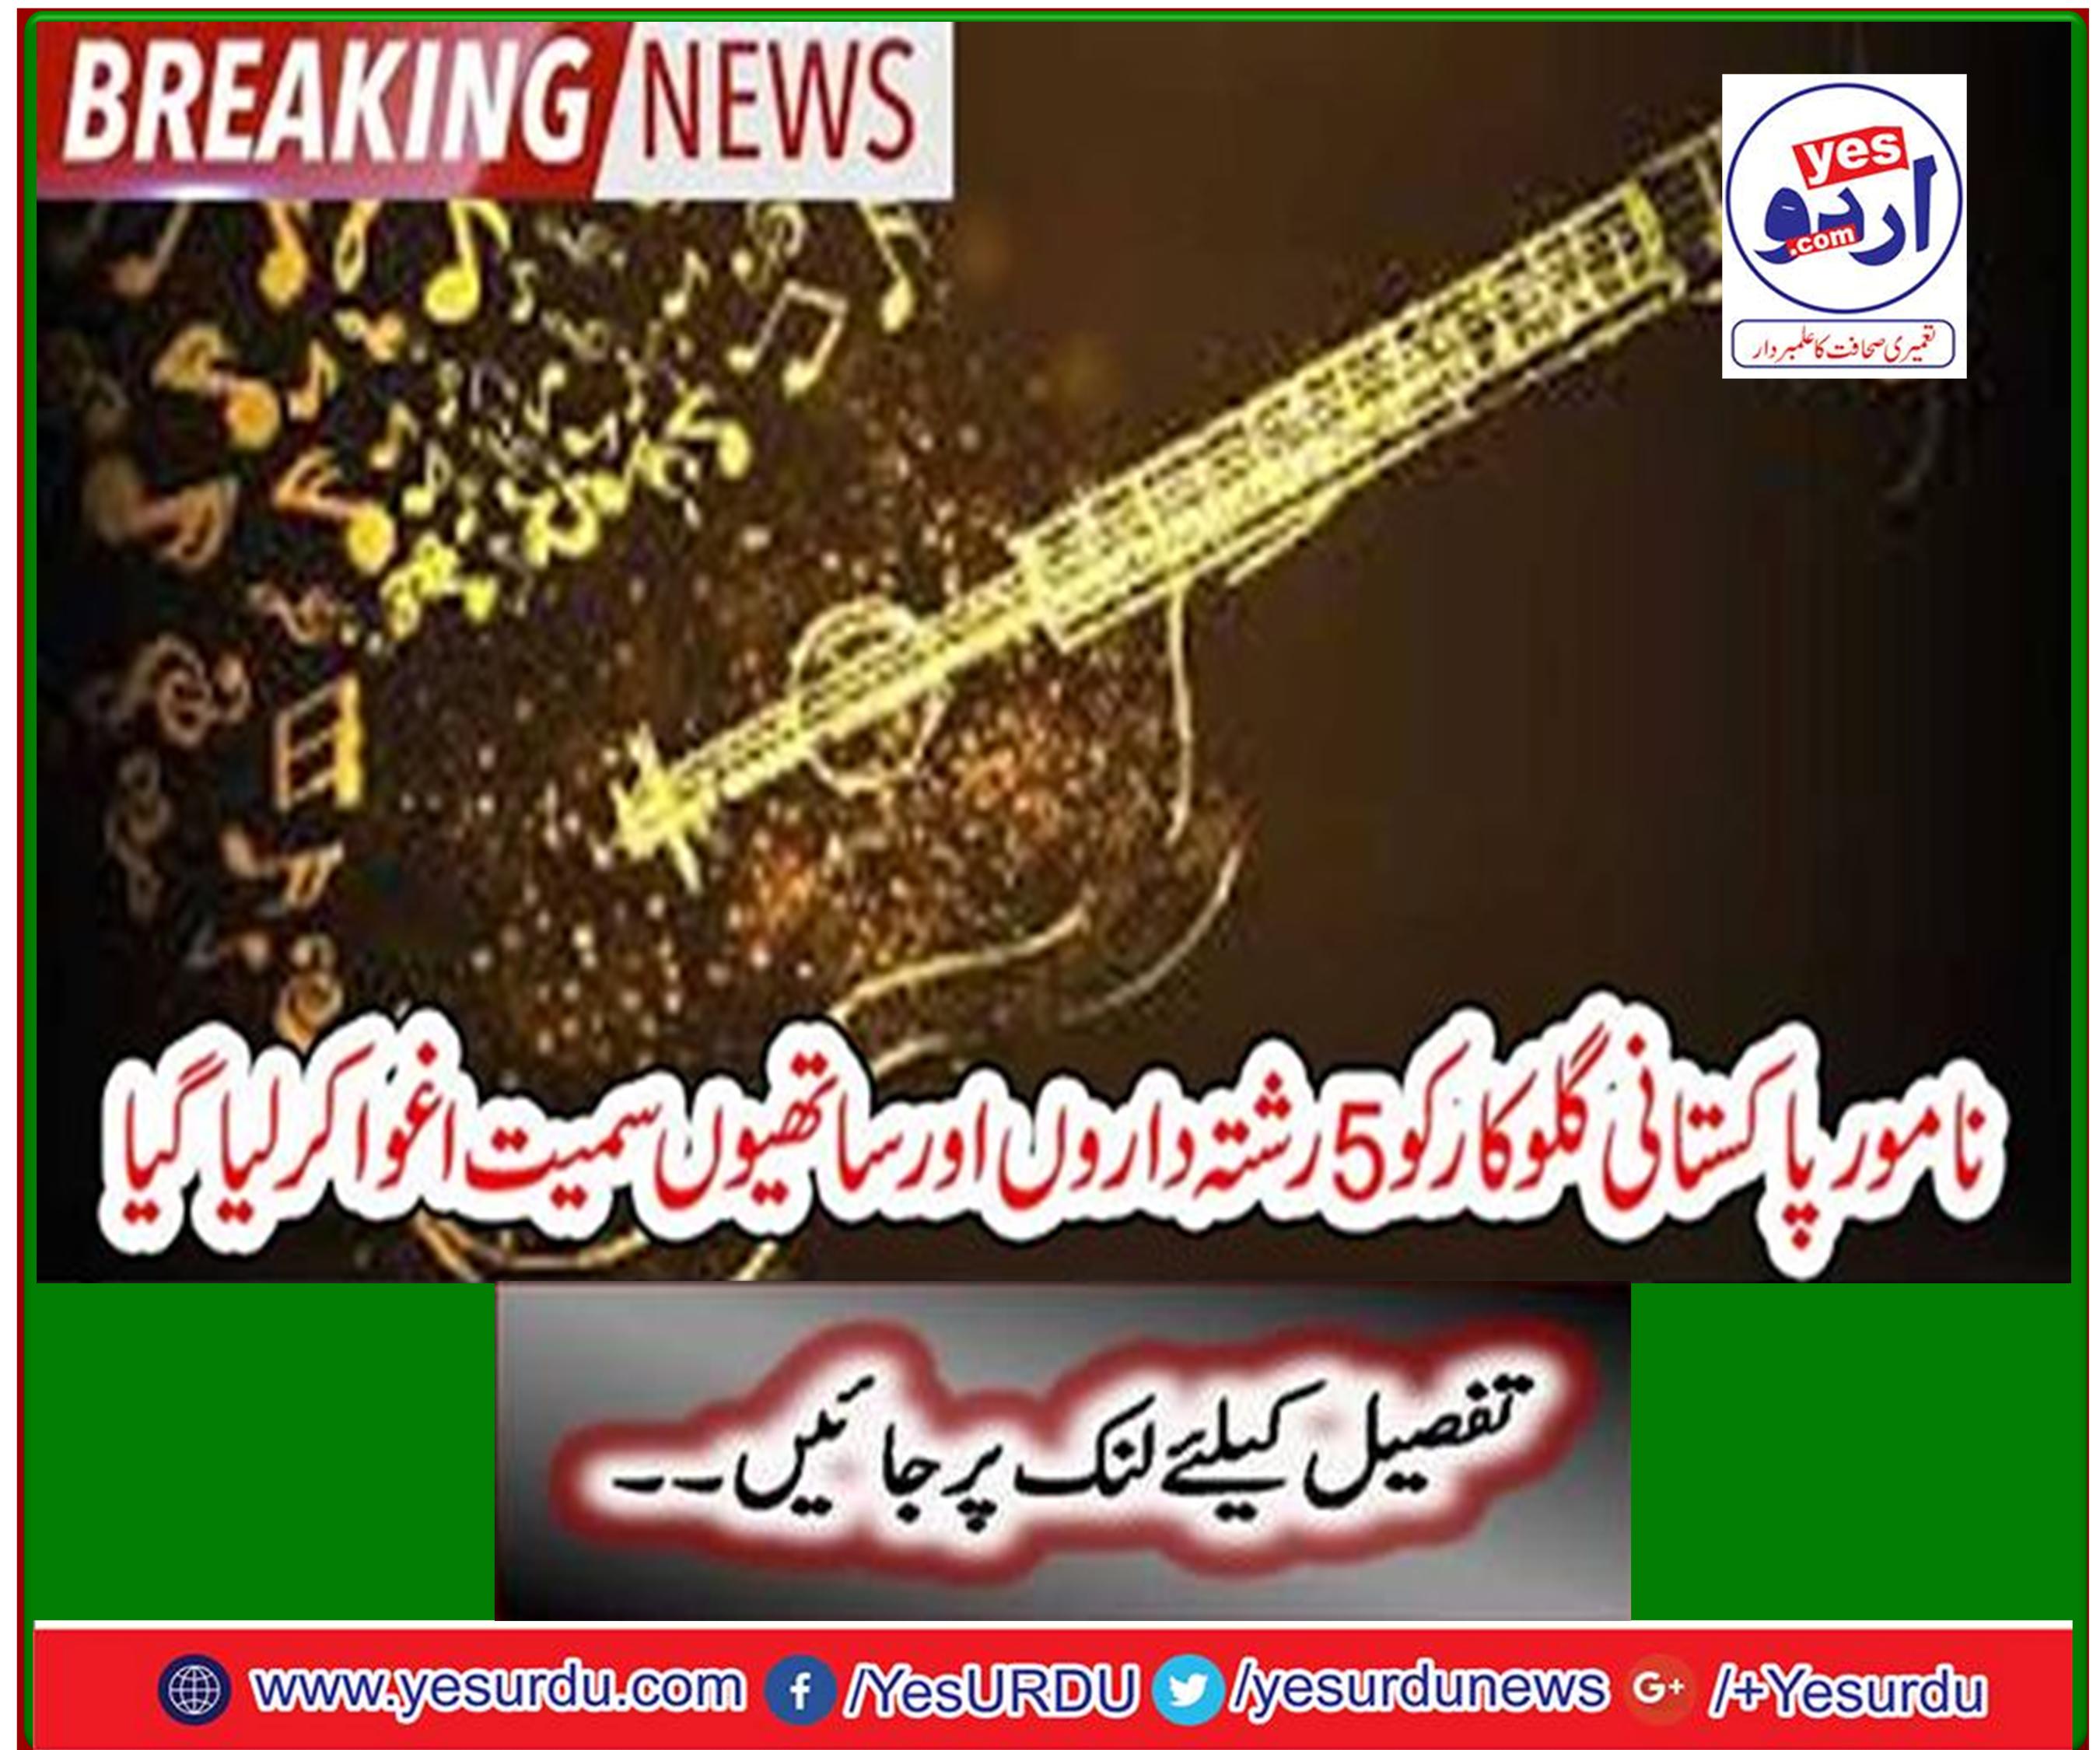 Breaking News: Famous Pakistani singer kidnapped along with 5 relatives and colleagues